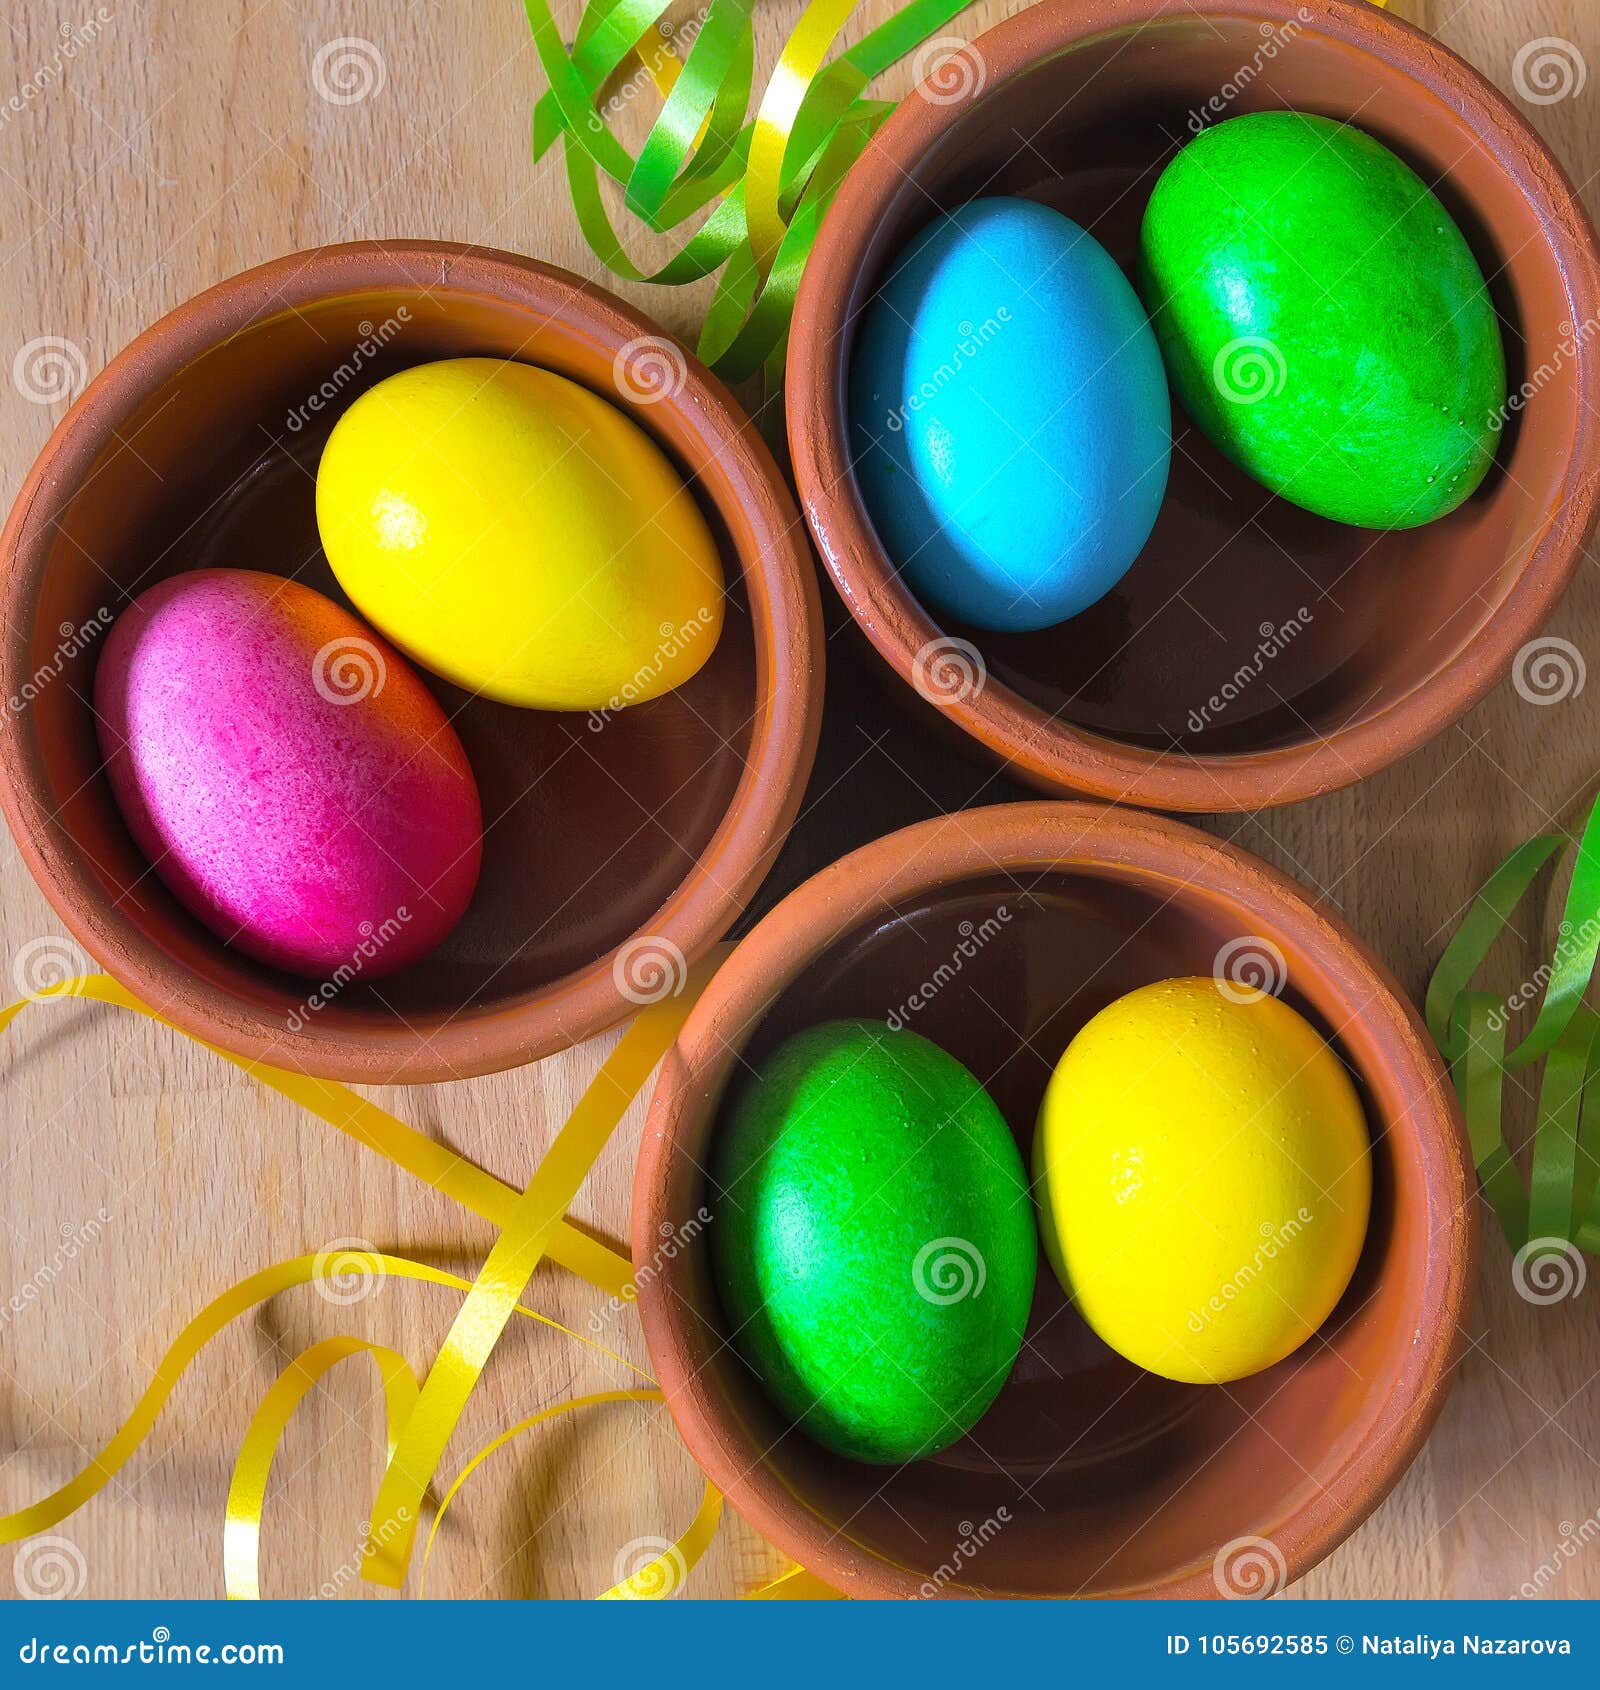 Colored Decorated Easter Eggs in Clay Bowls Stock Image - Image of ...